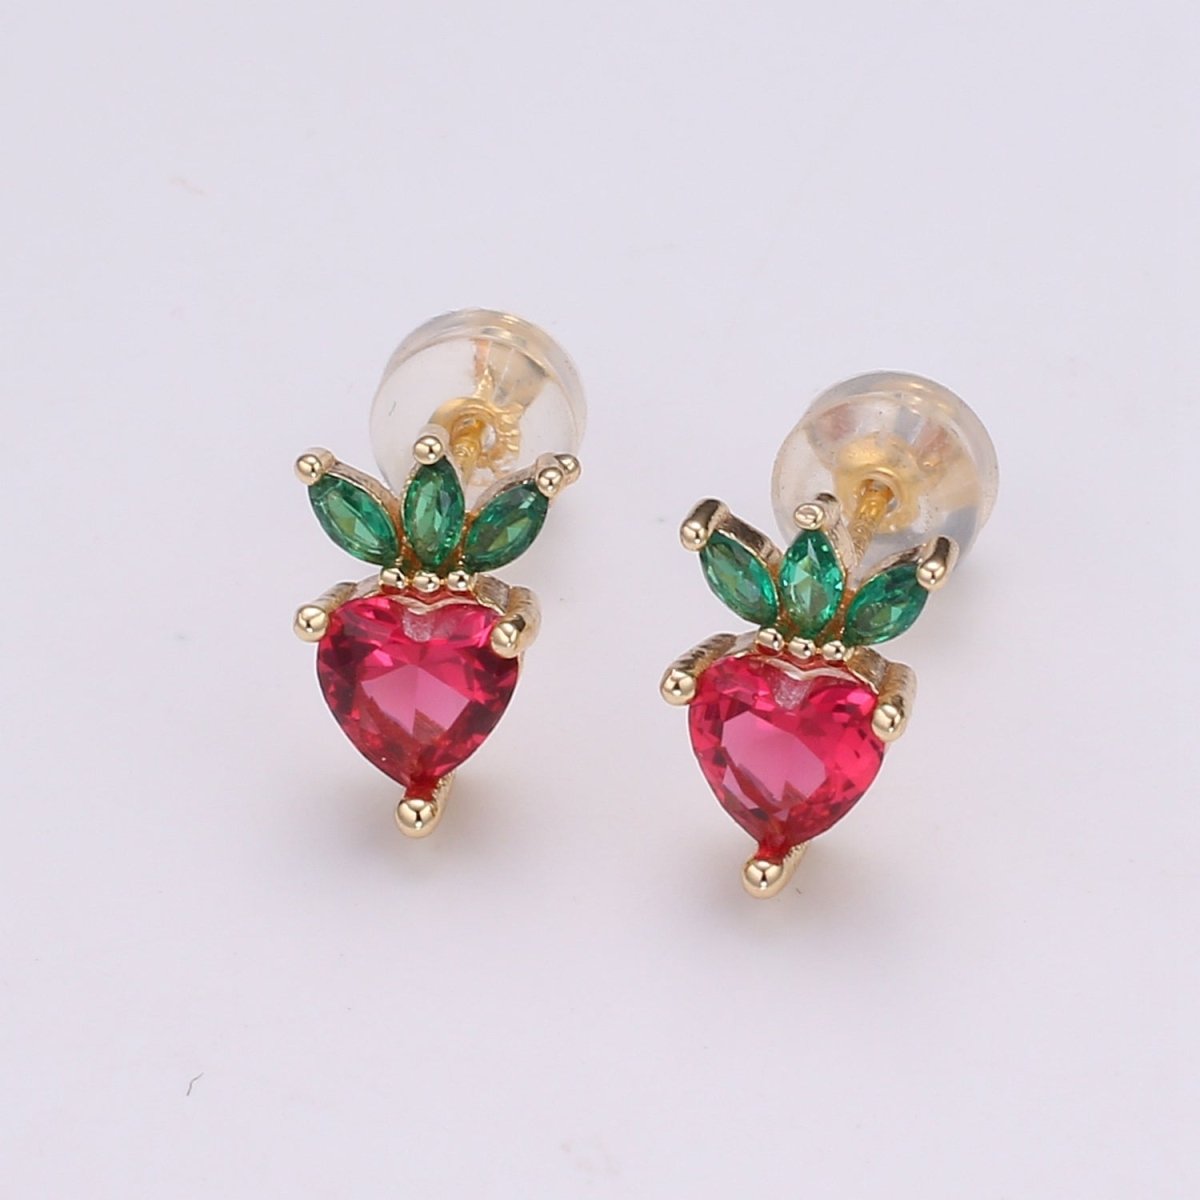 Gold Strawberry Stud Earring, Crystal Berry Studs, Strawberry Fruit Earring, Minimalist Earring, Dainty Earrings for Girls, Gift P-016 - DLUXCA